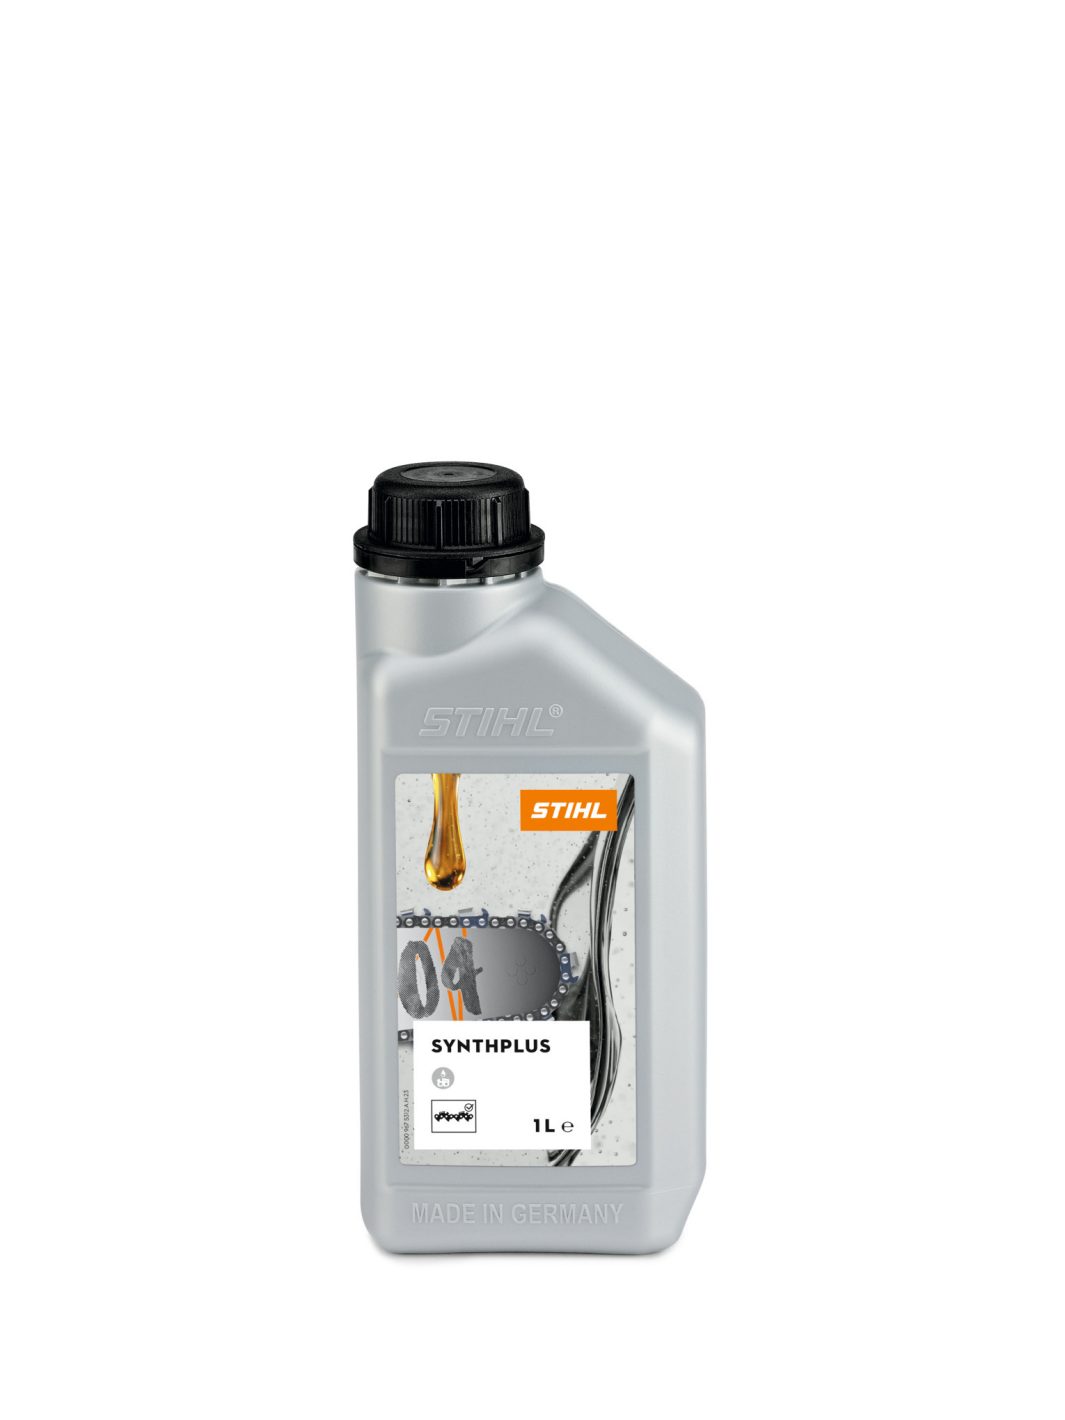 STIHL SynthPlus Chain Oil for Chainsaws &amp; Harvesters (1L)